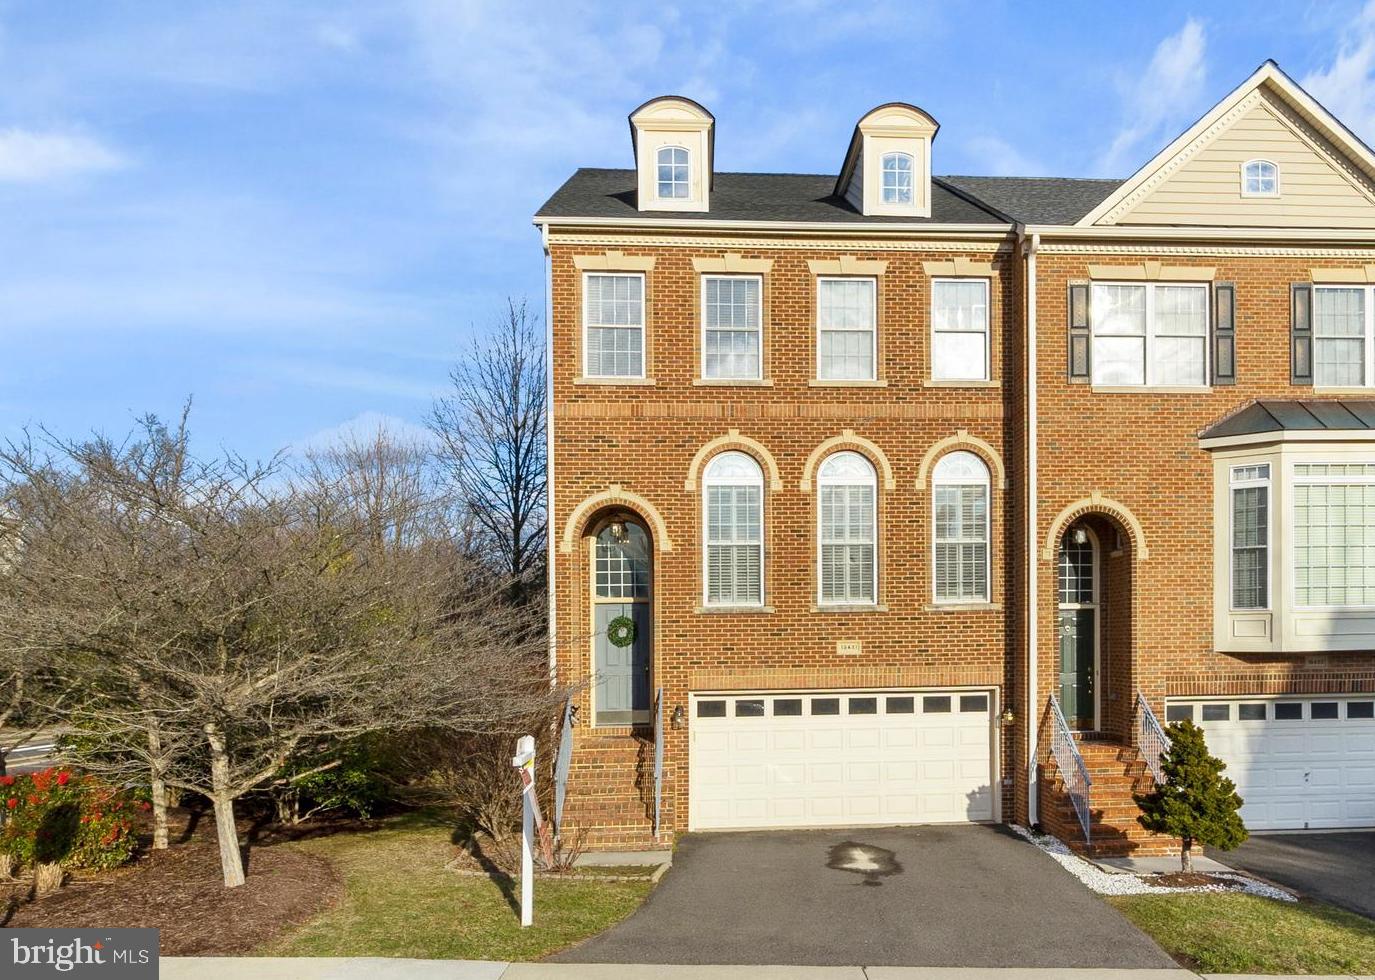 View Centreville, VA 20120 townhome